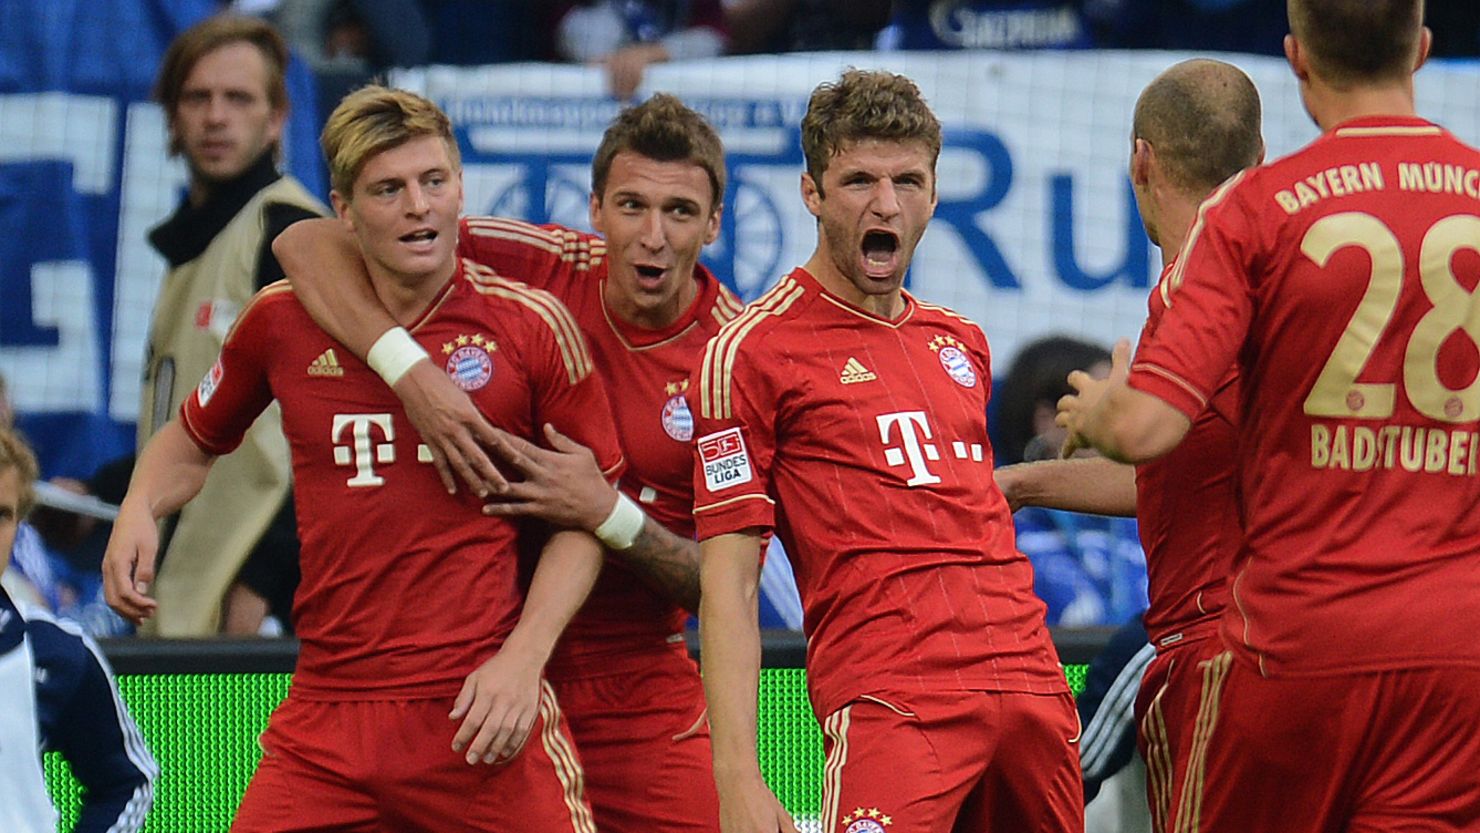 Bayern's players celebrate a goal for Thomas Mueller in their impressive win over Schalke in the Bundesliga.